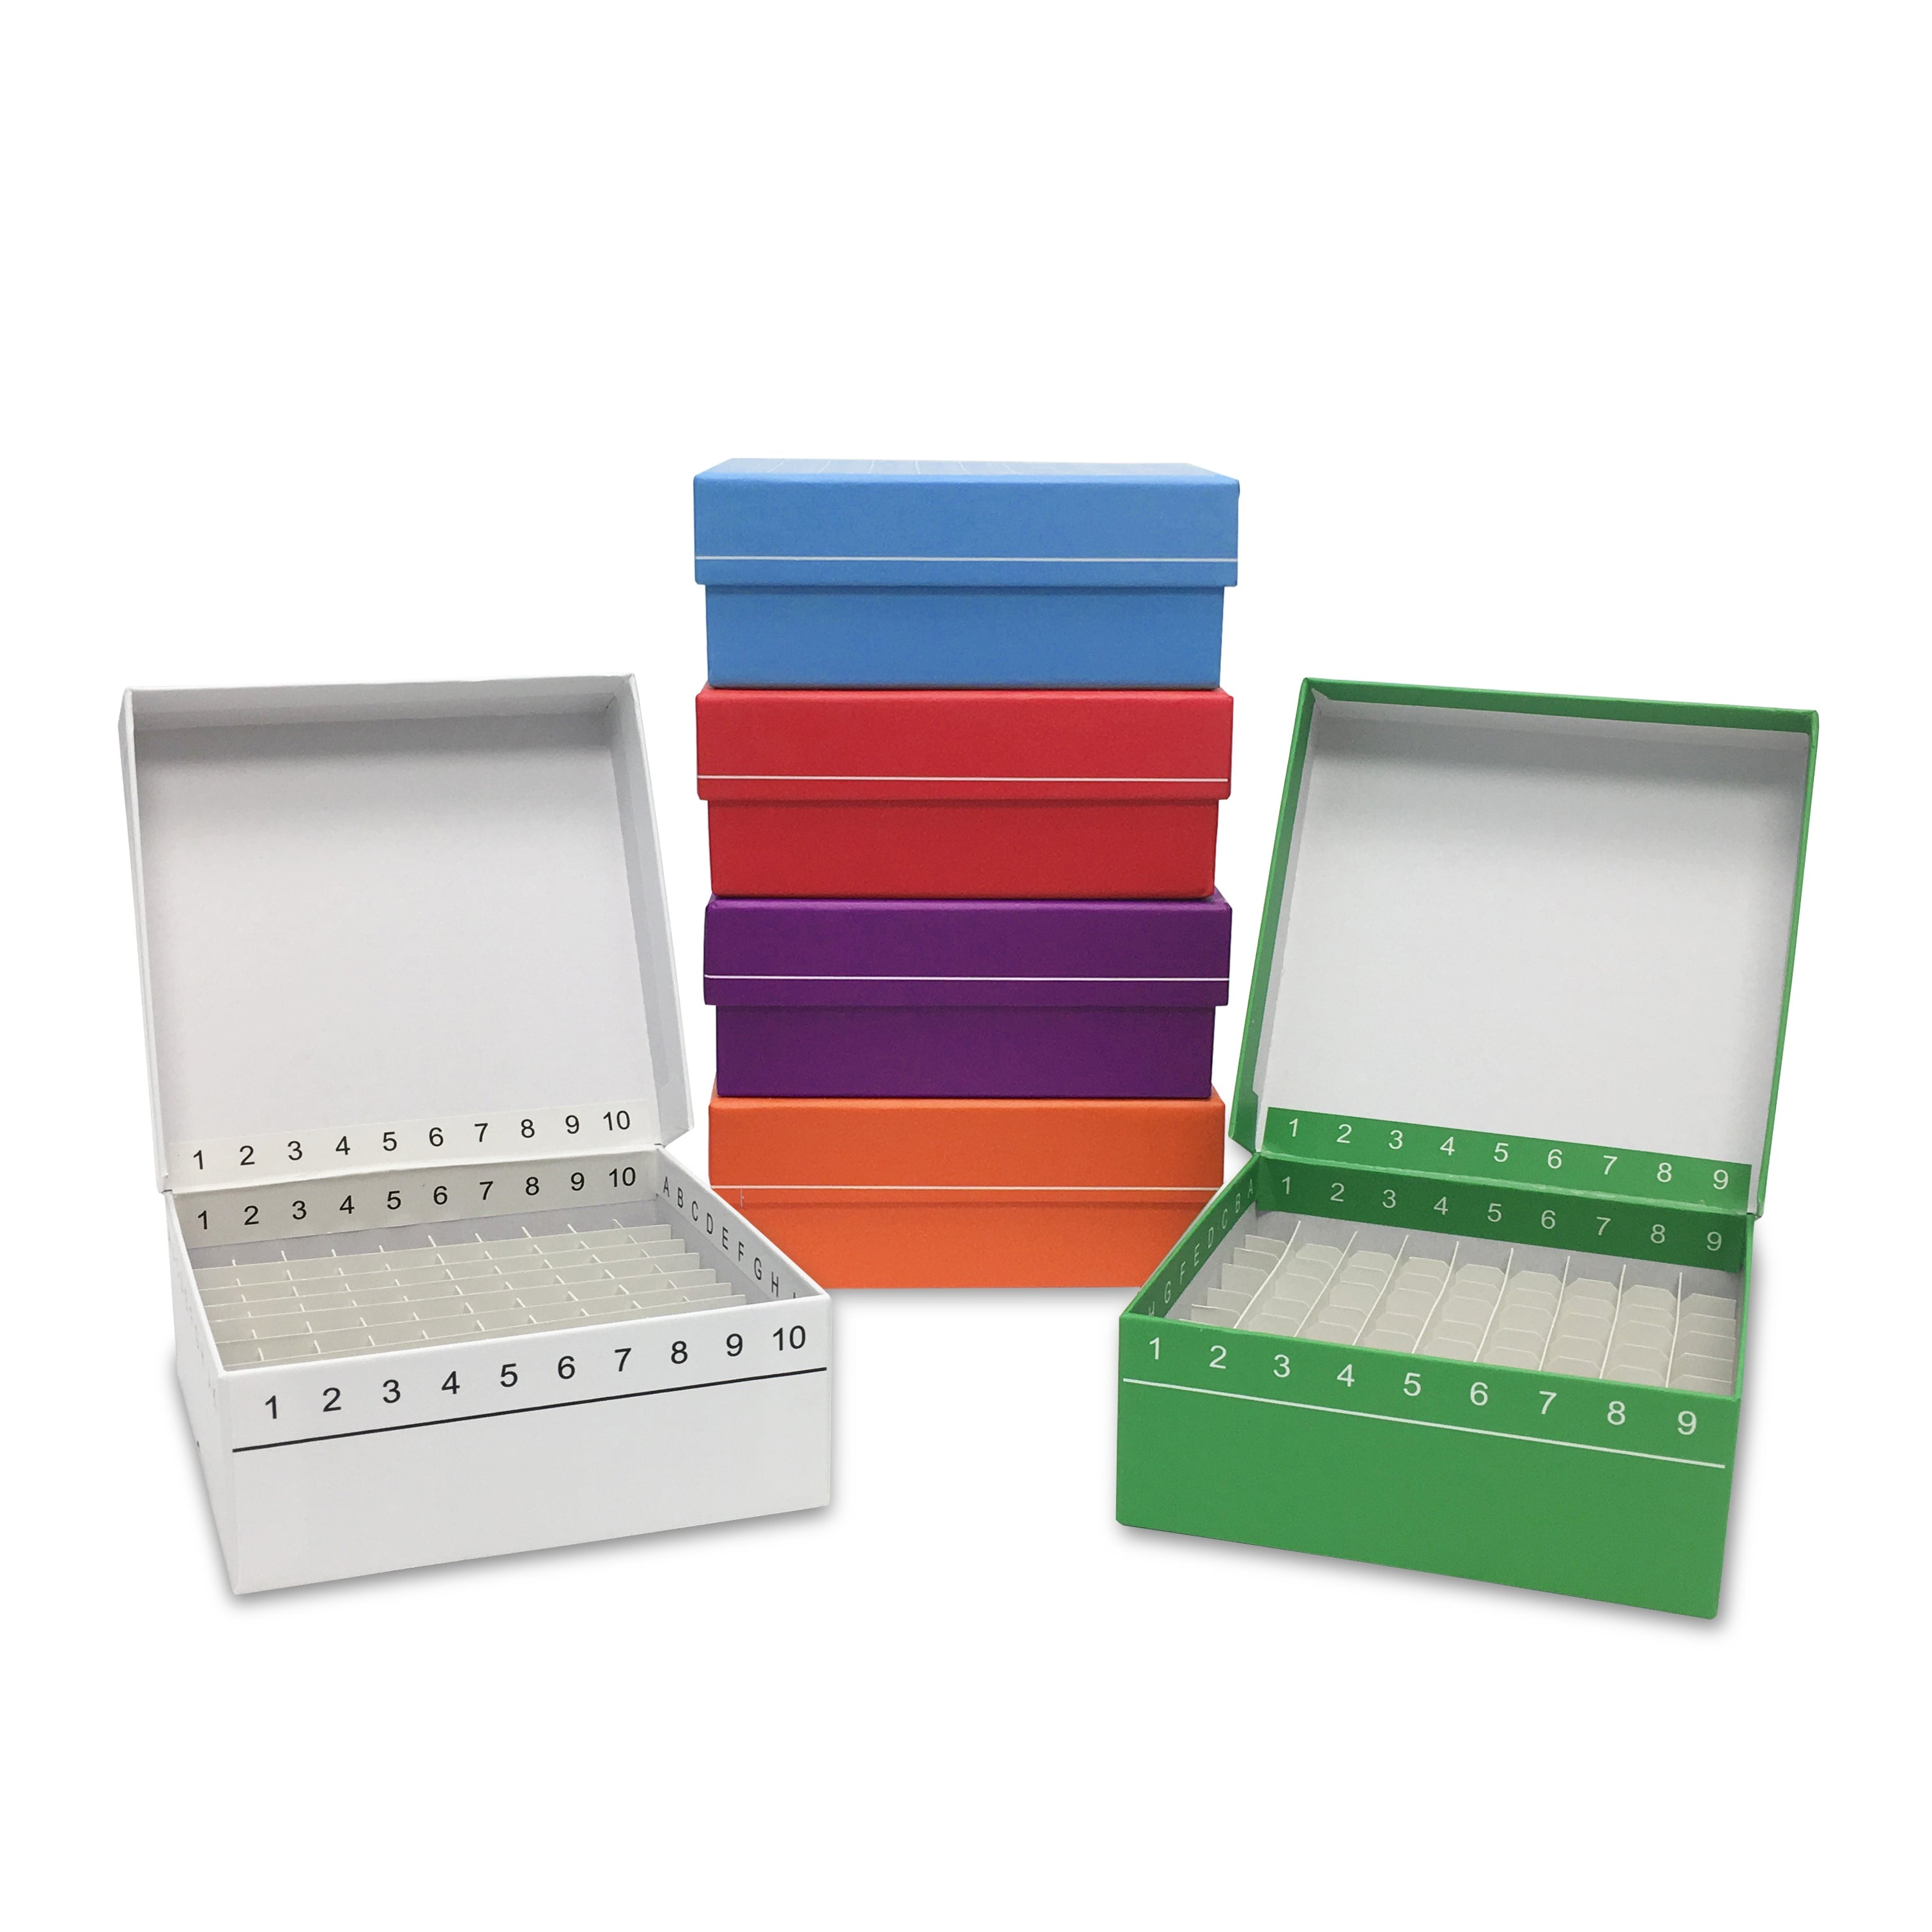 MTC Bio R2700-G FlipTop™ Carboard freezer box w/ attached hinged lid, 100-place, green, 5/pk